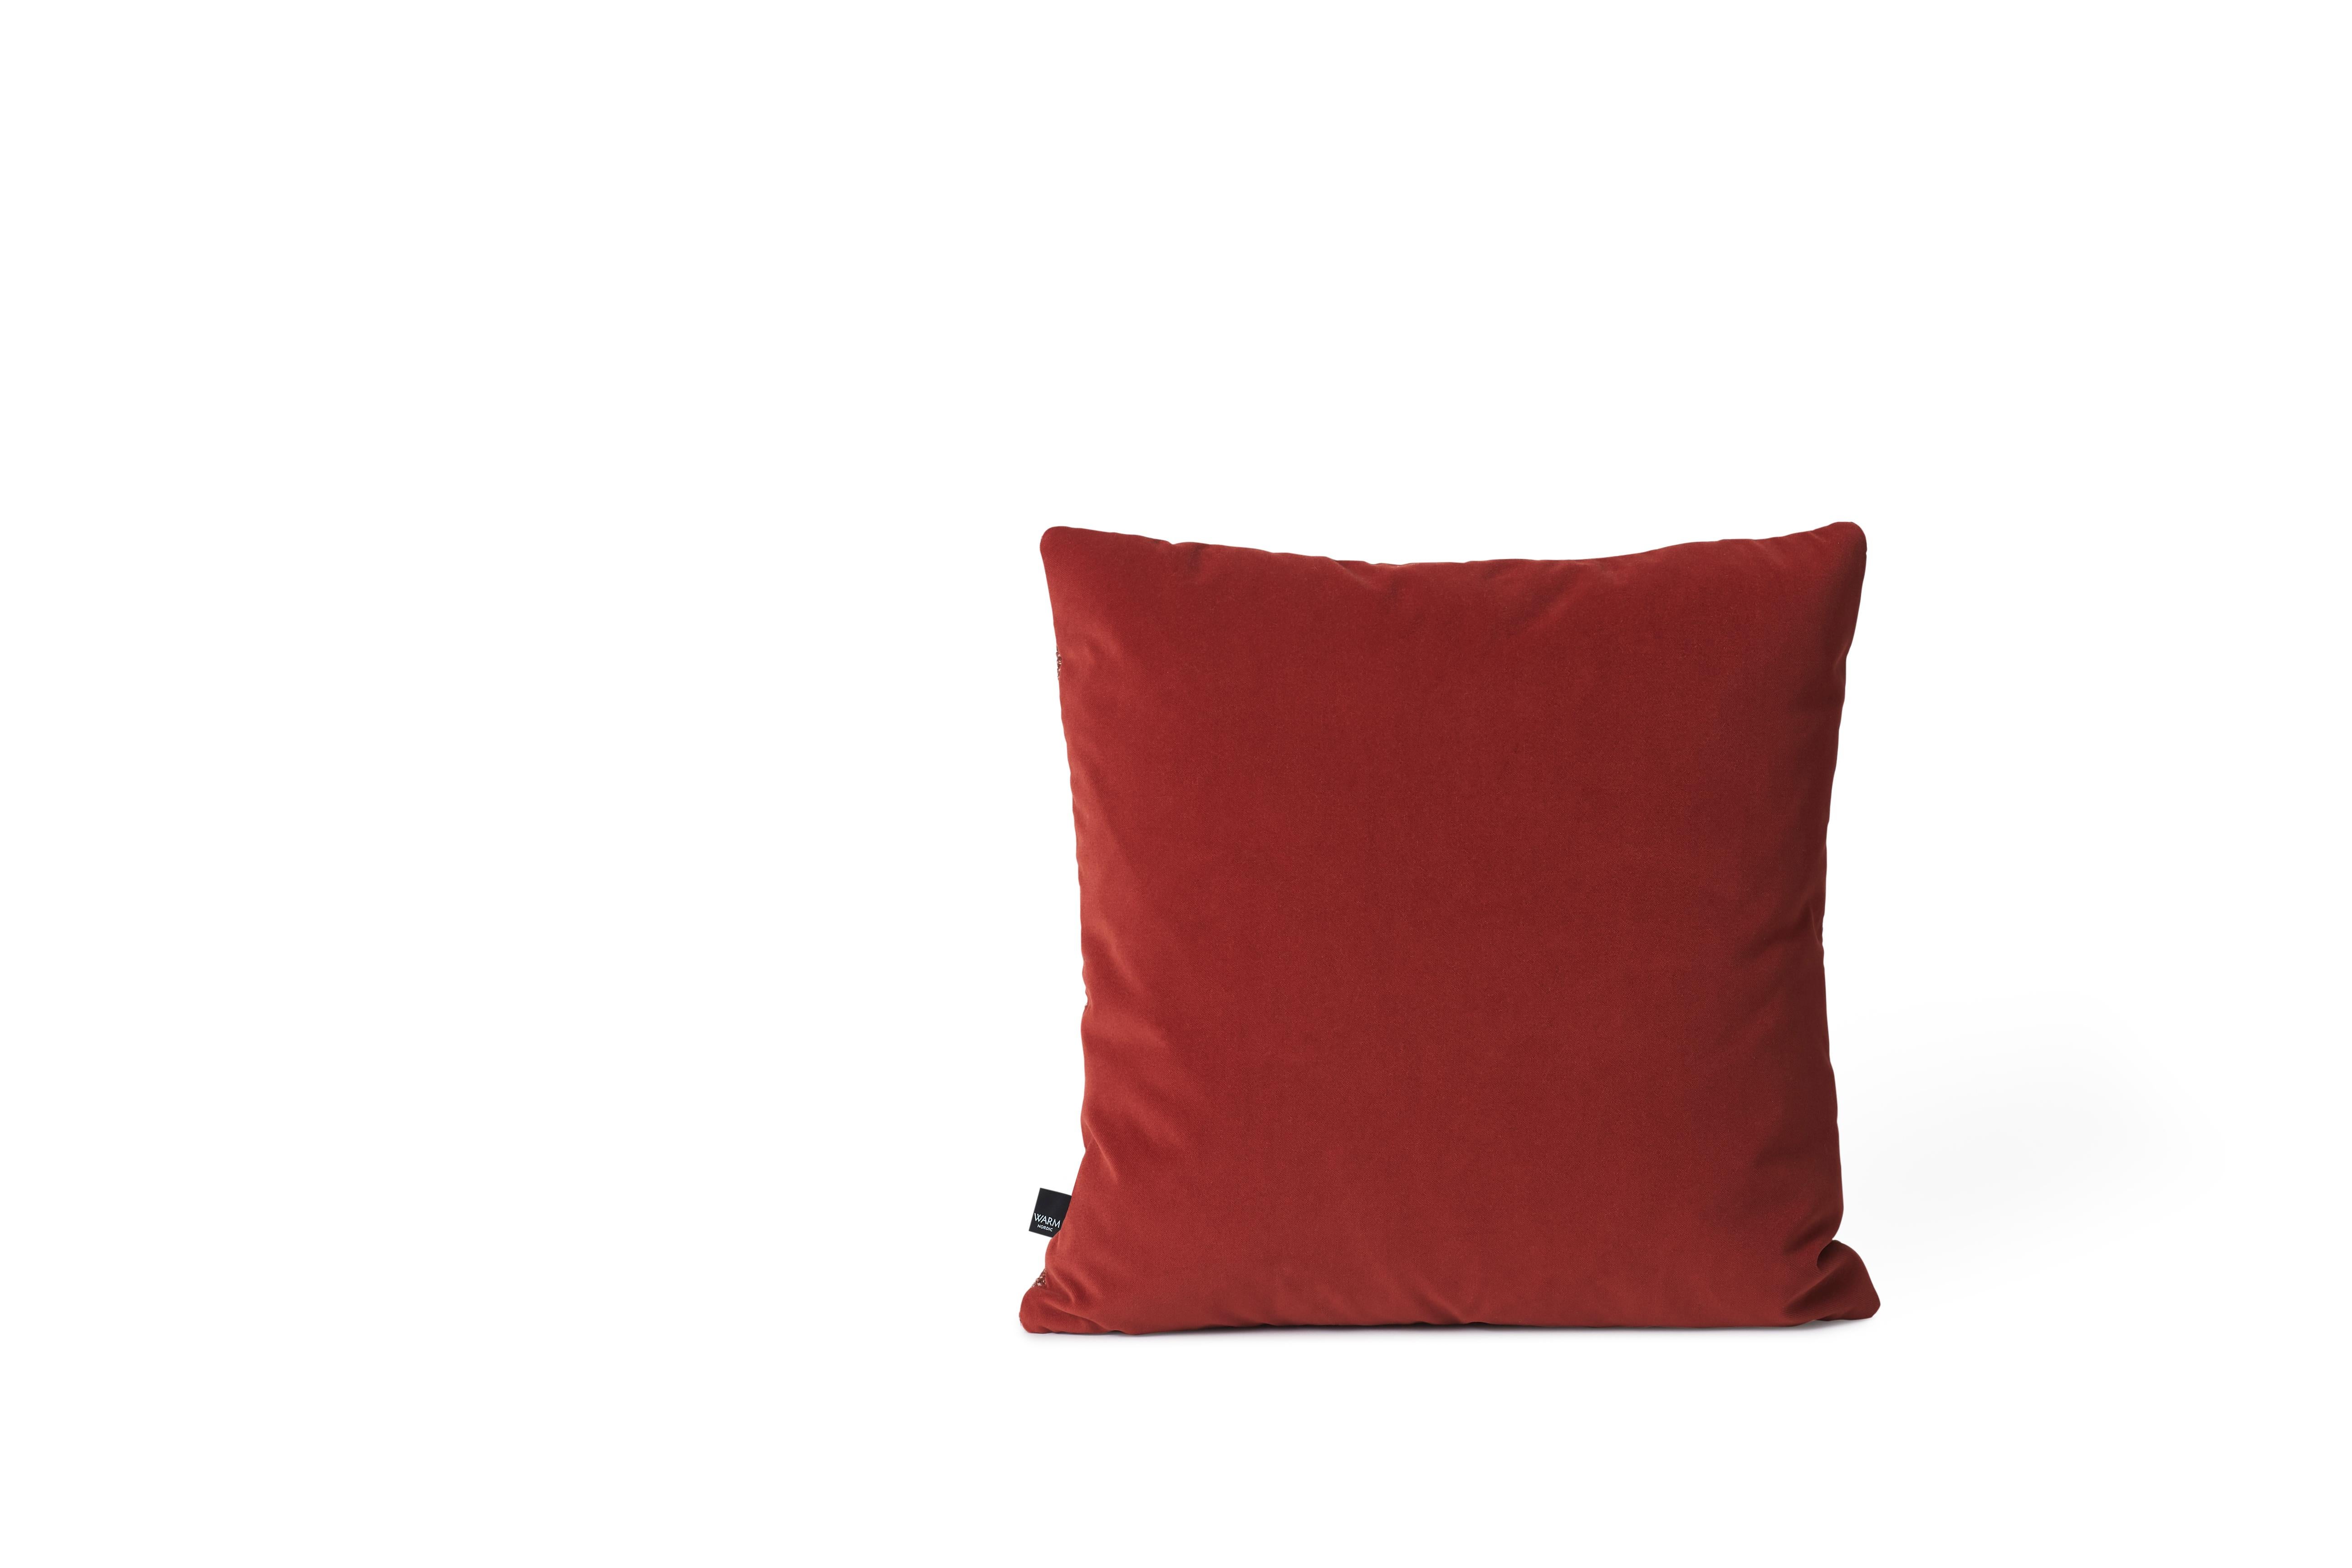 For Sale: Red Moodify Square Cushion, by Warm Nordic